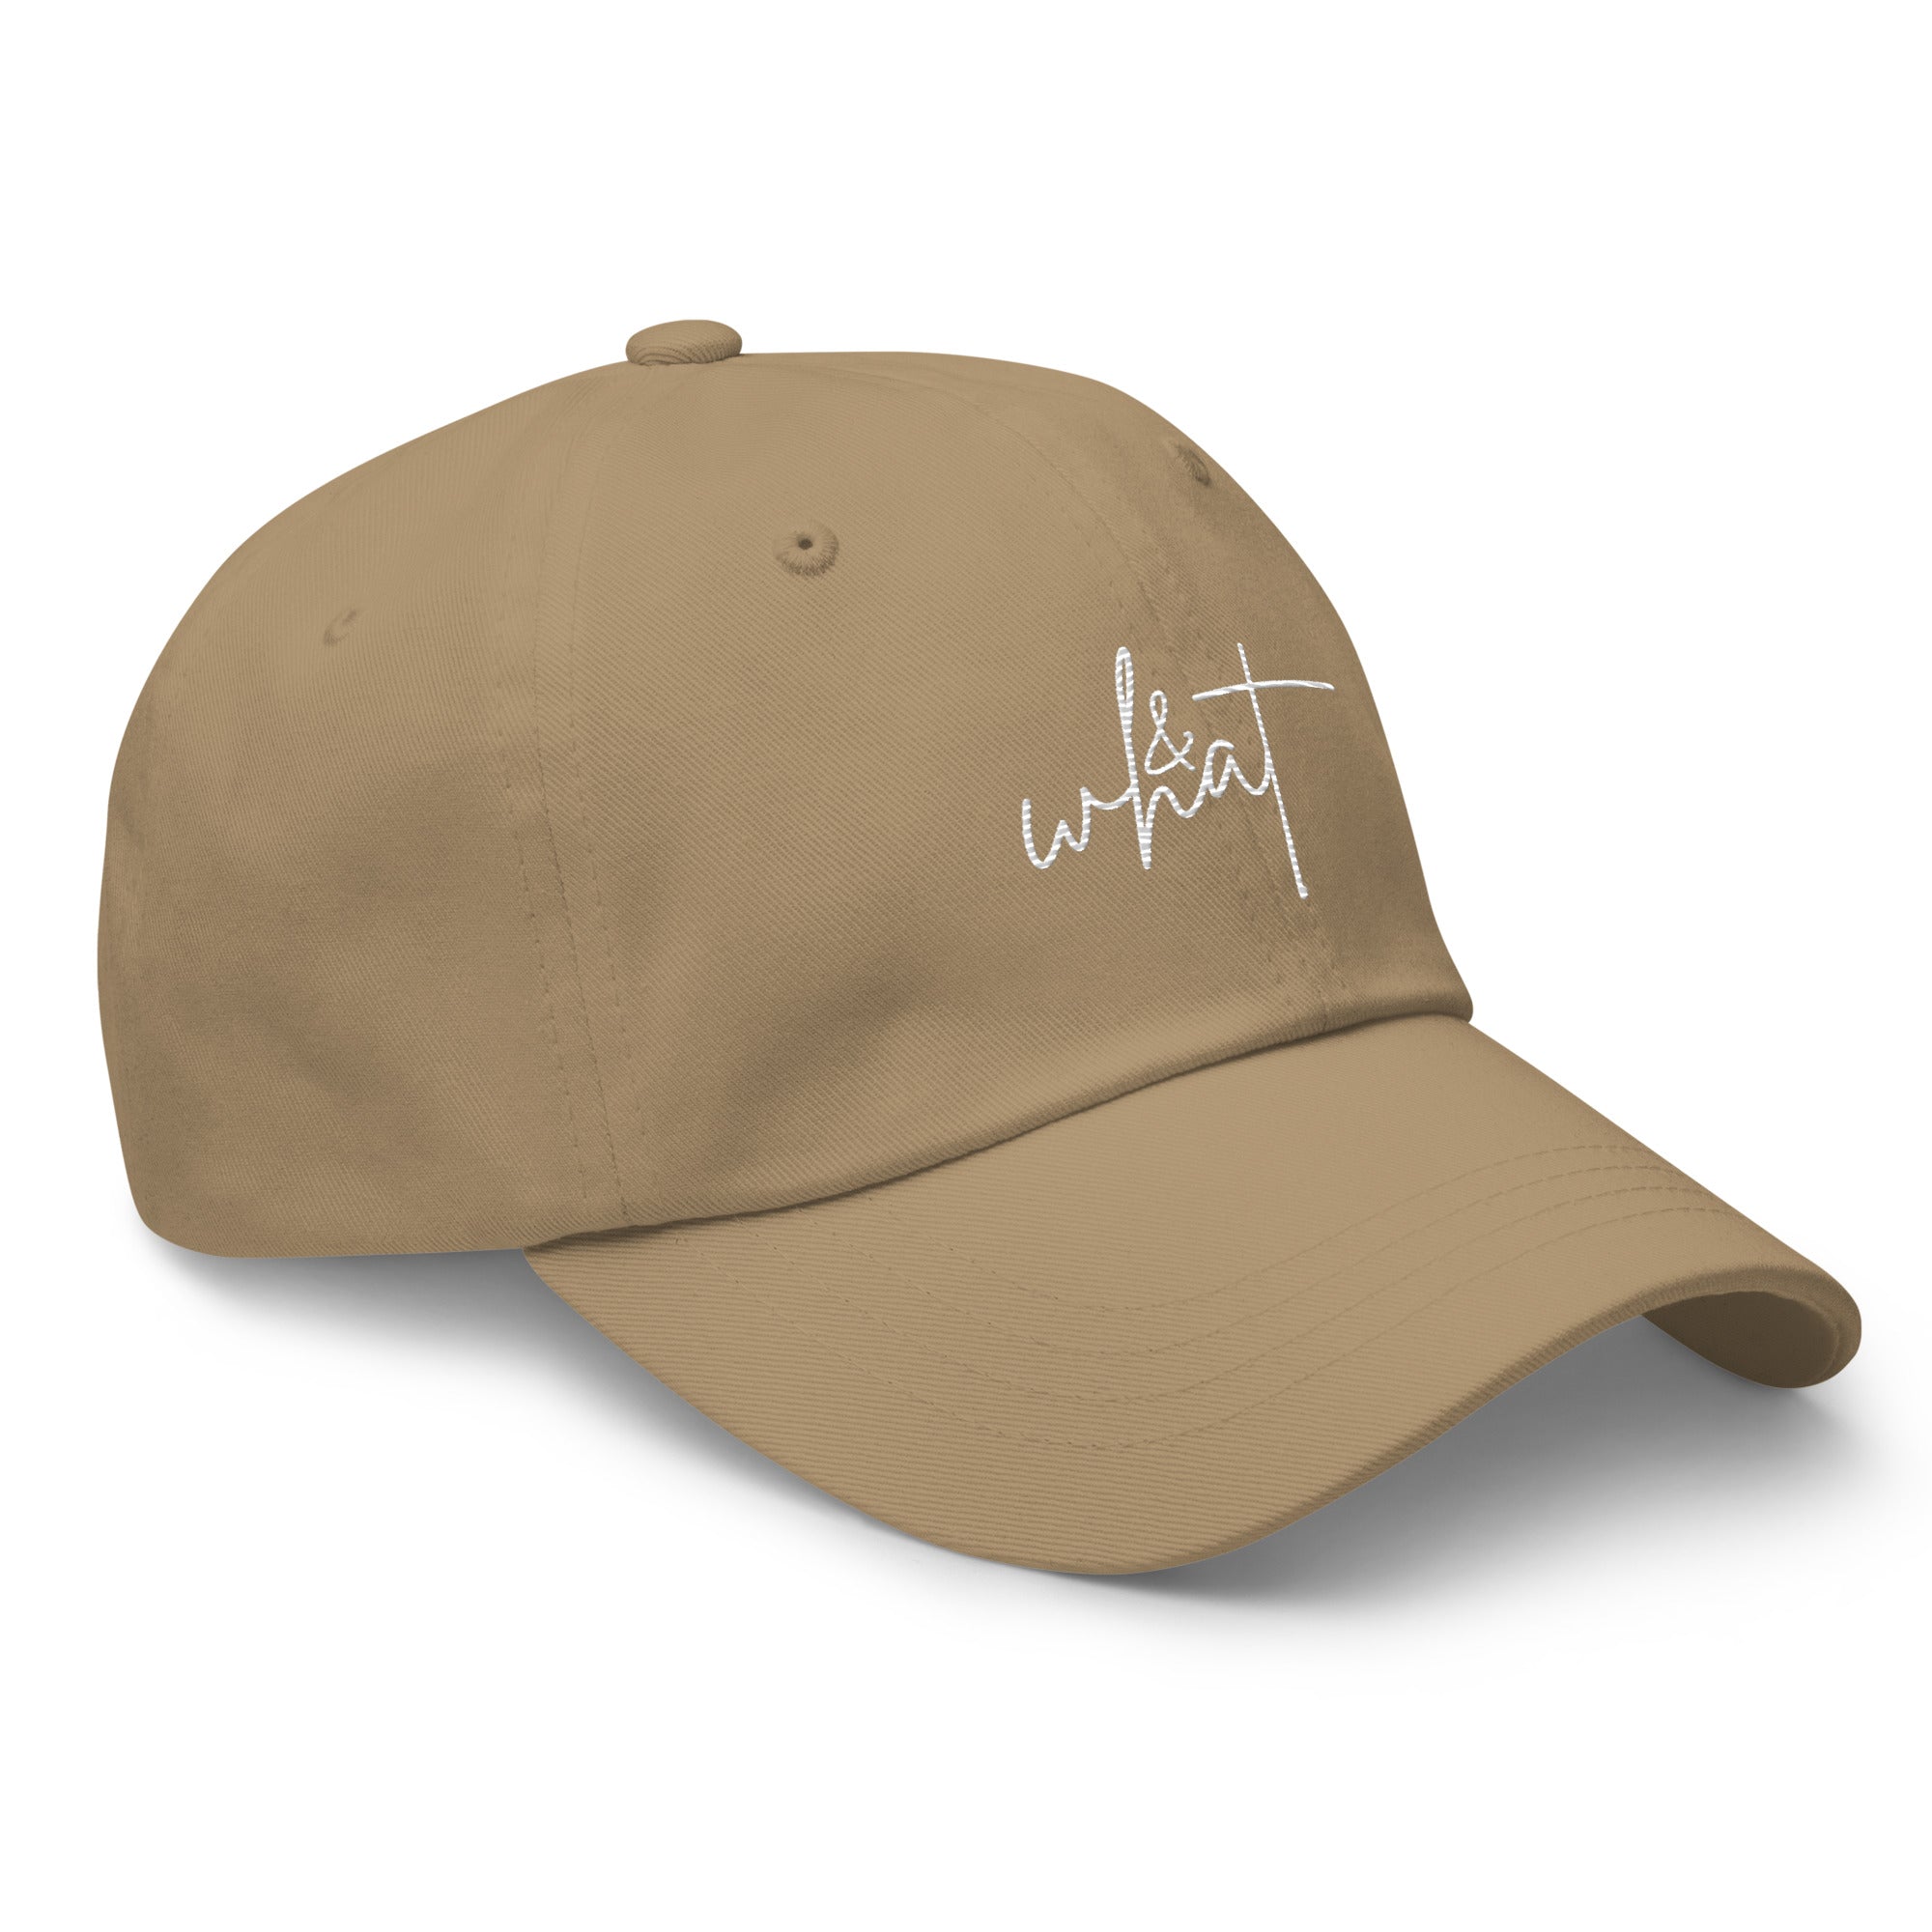 Hat | & What